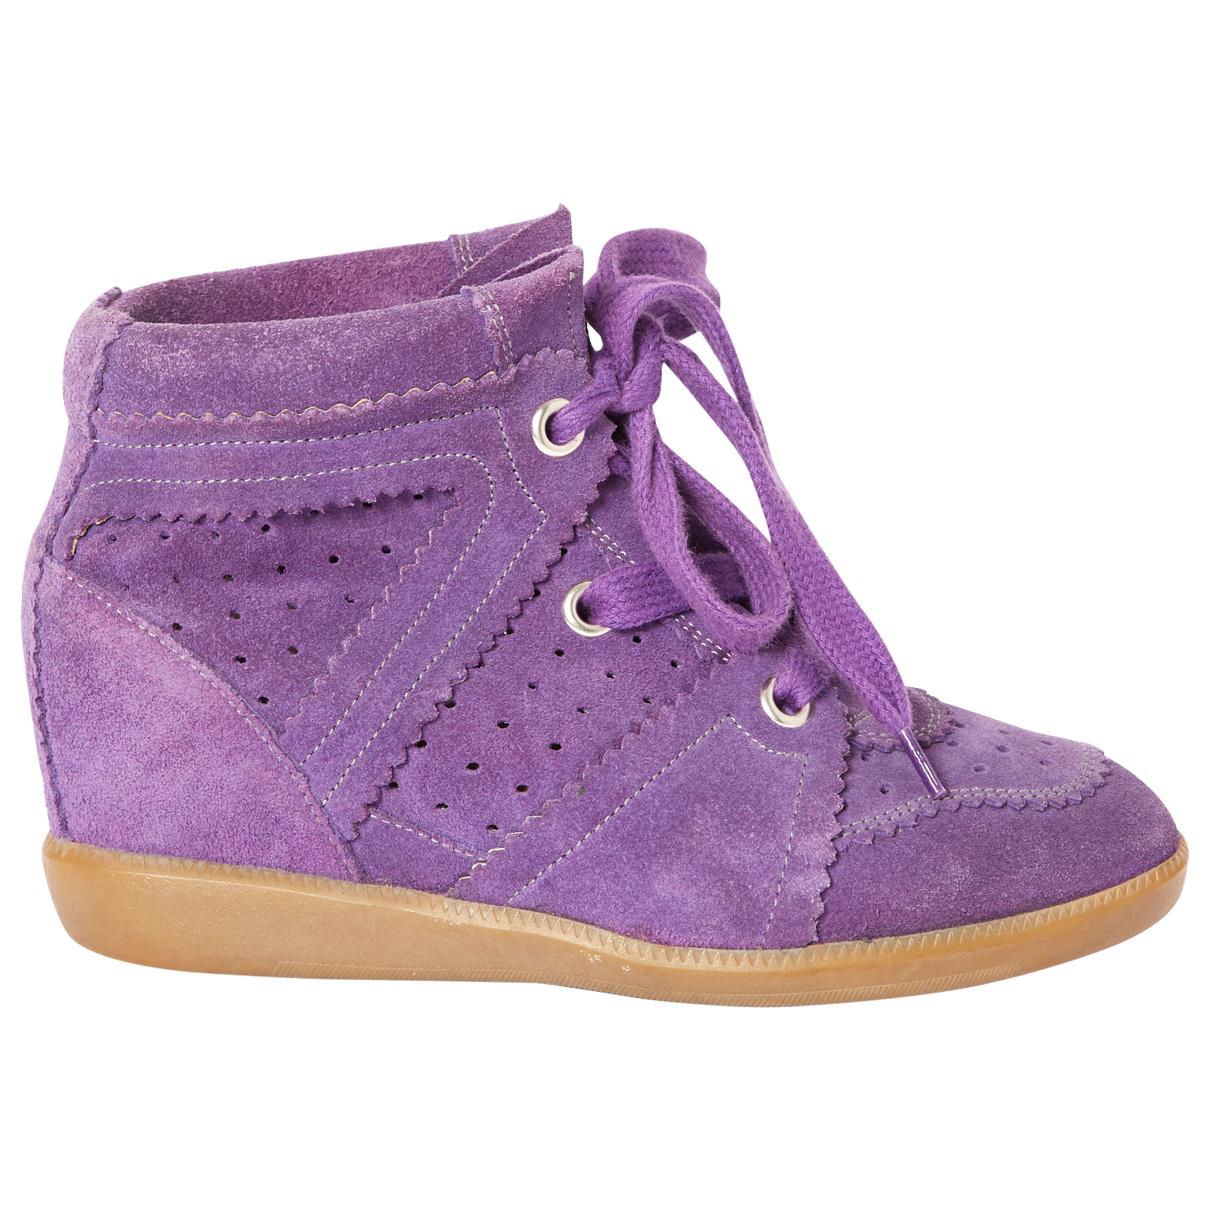 Isabel Marant Betty Purple Suede Trainers - Lyst